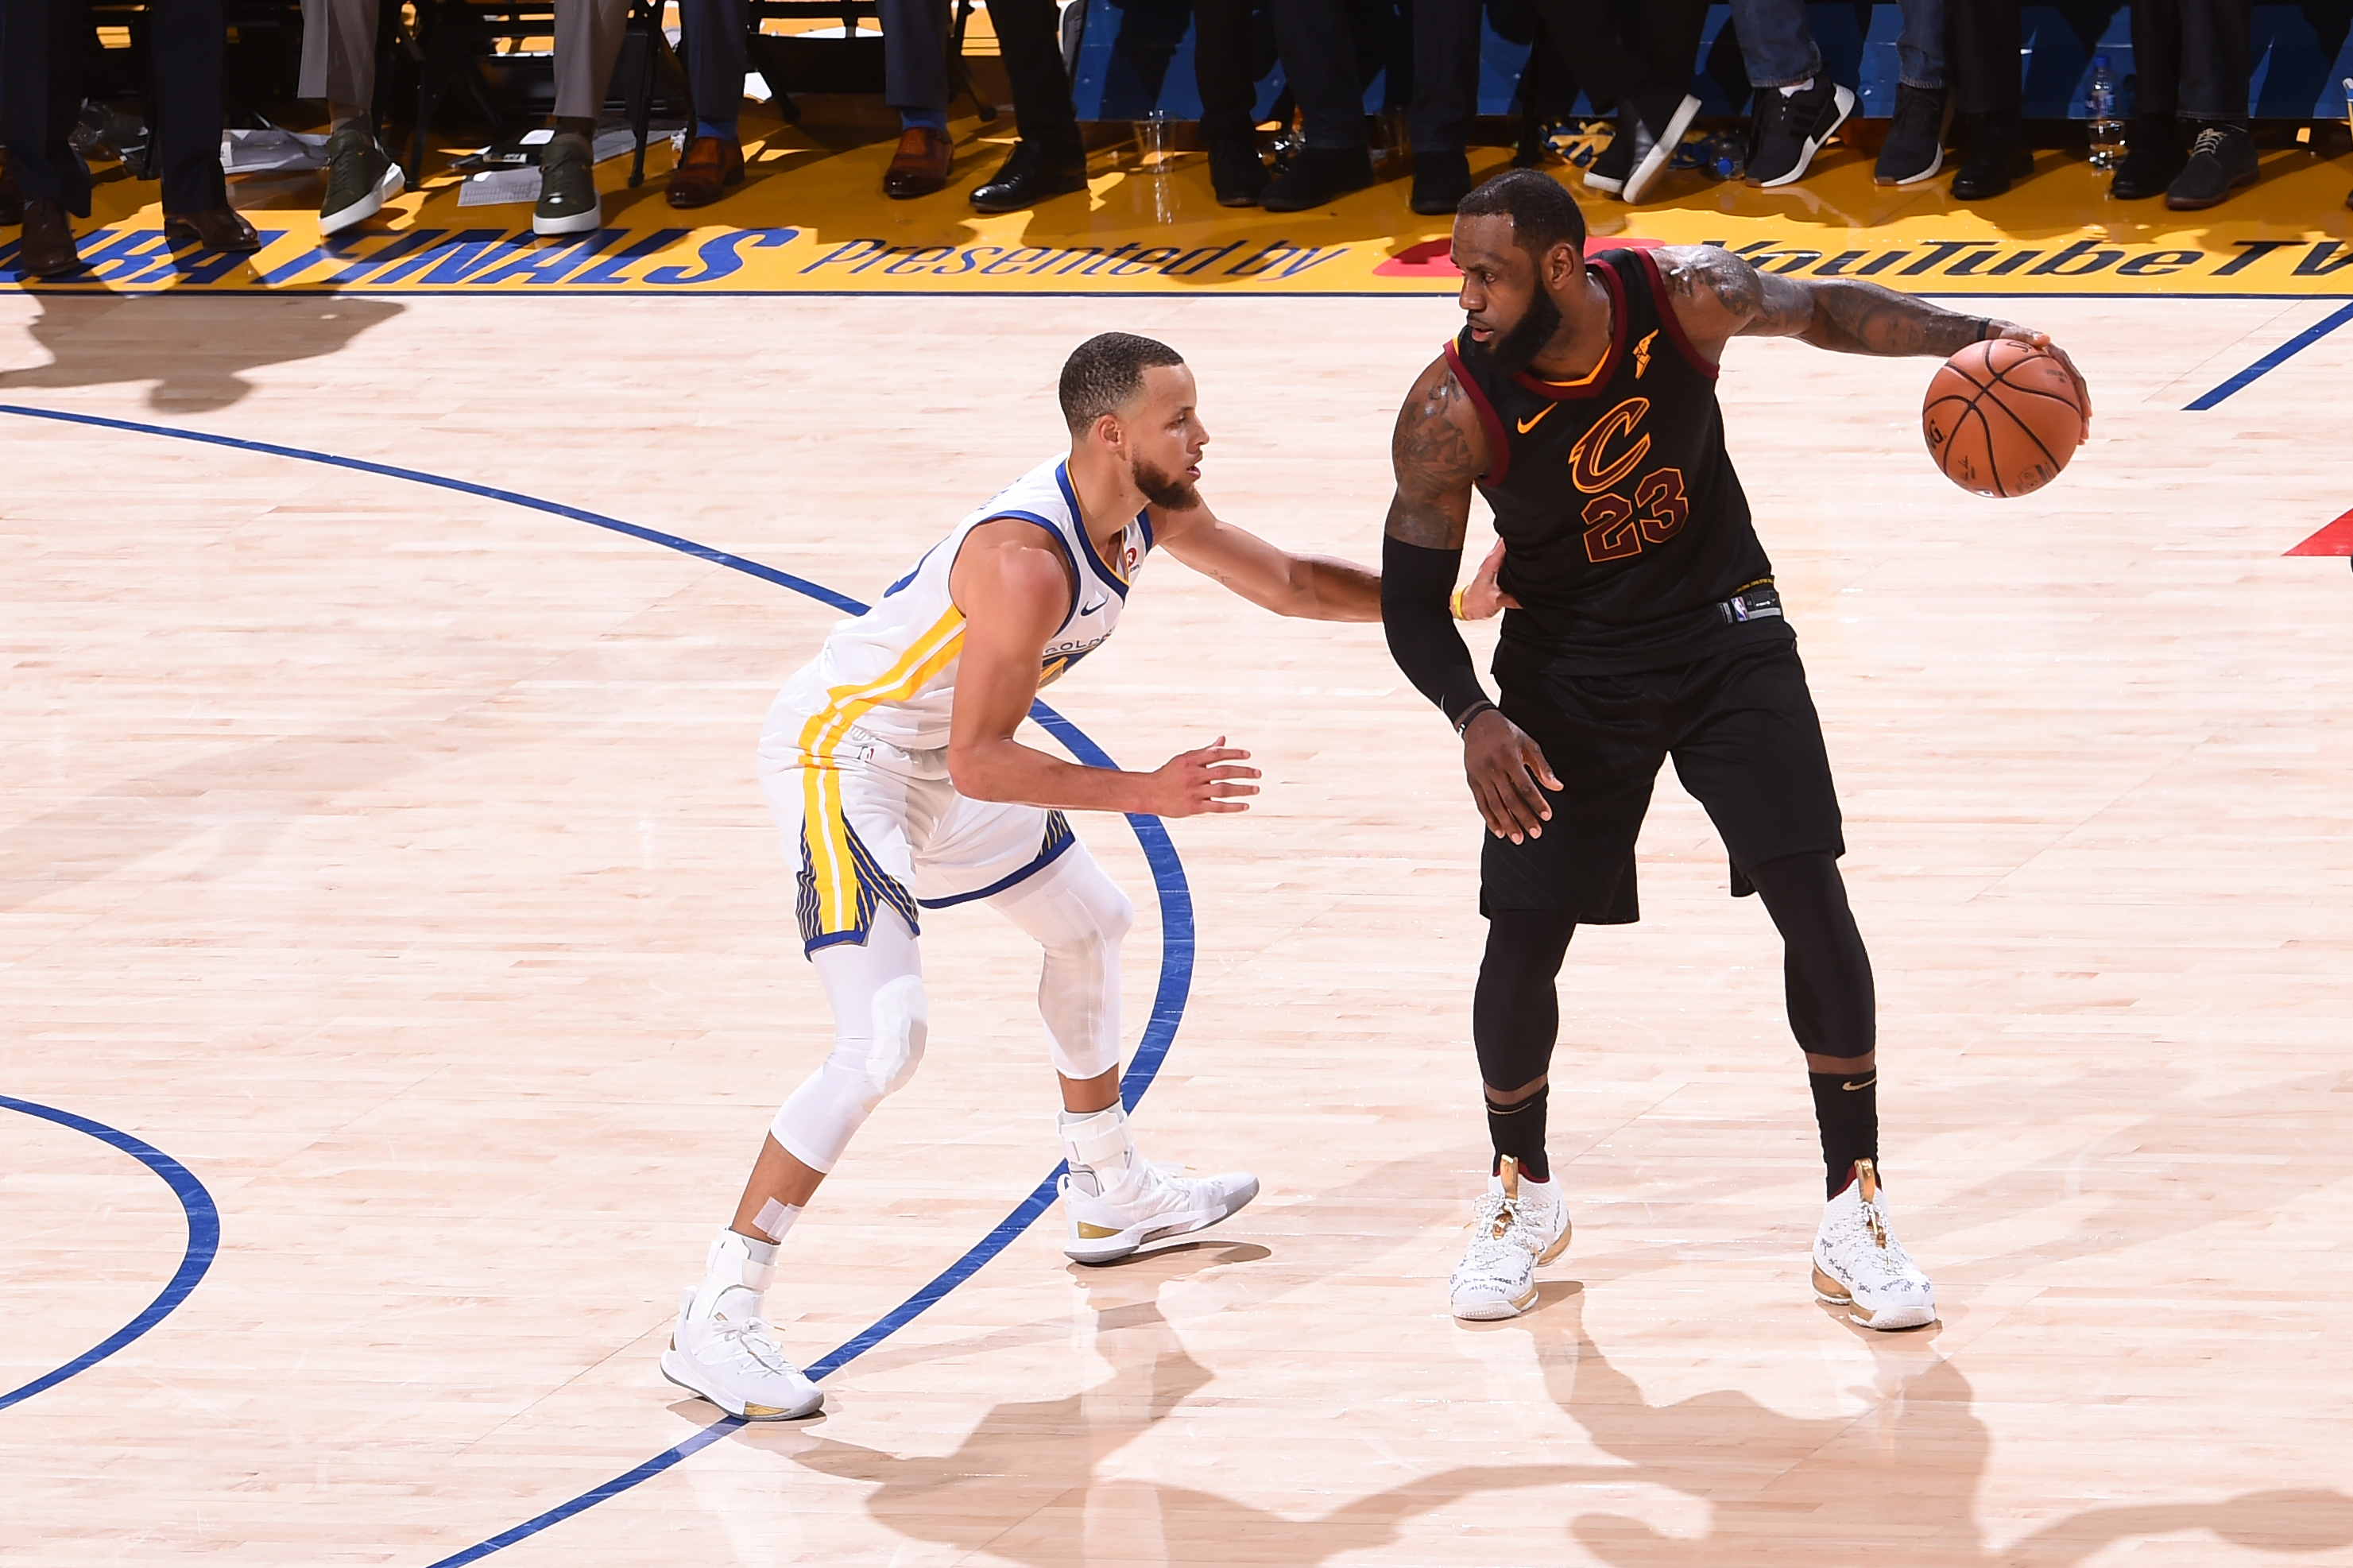 2018 NBA Finals: How to Live Stream the Game for Free Online